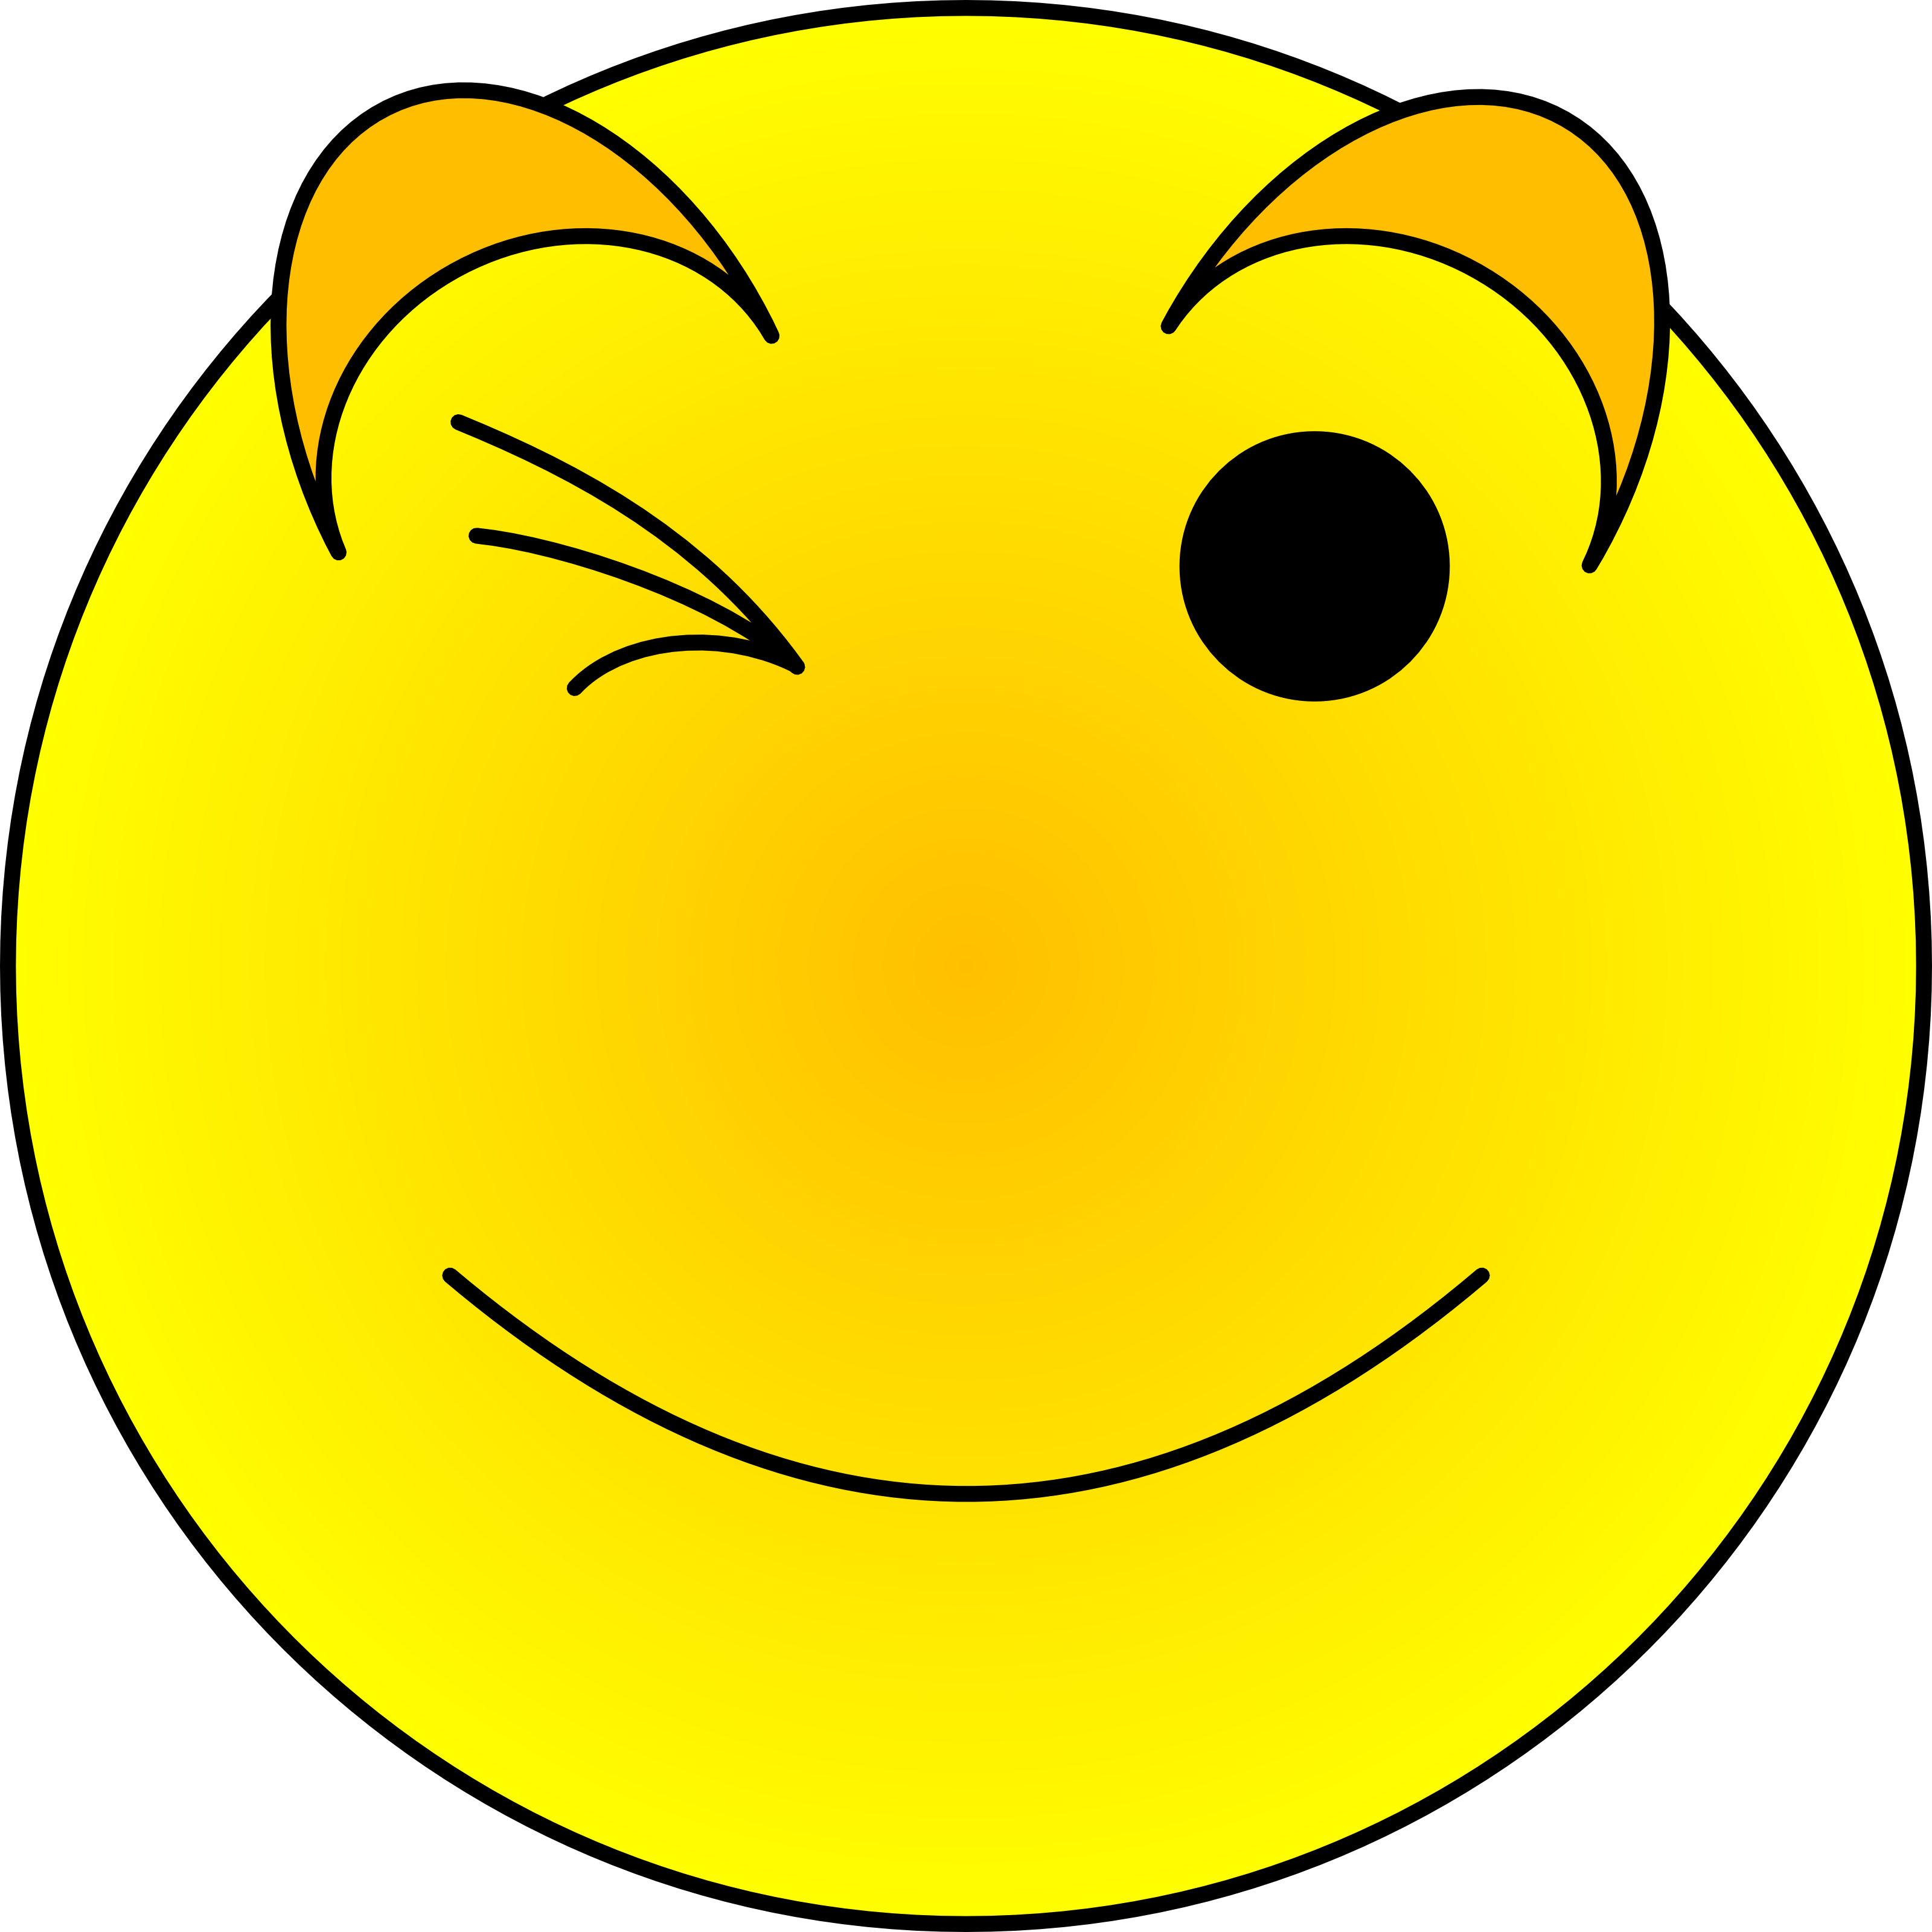 free clipart images happy face - photo #18